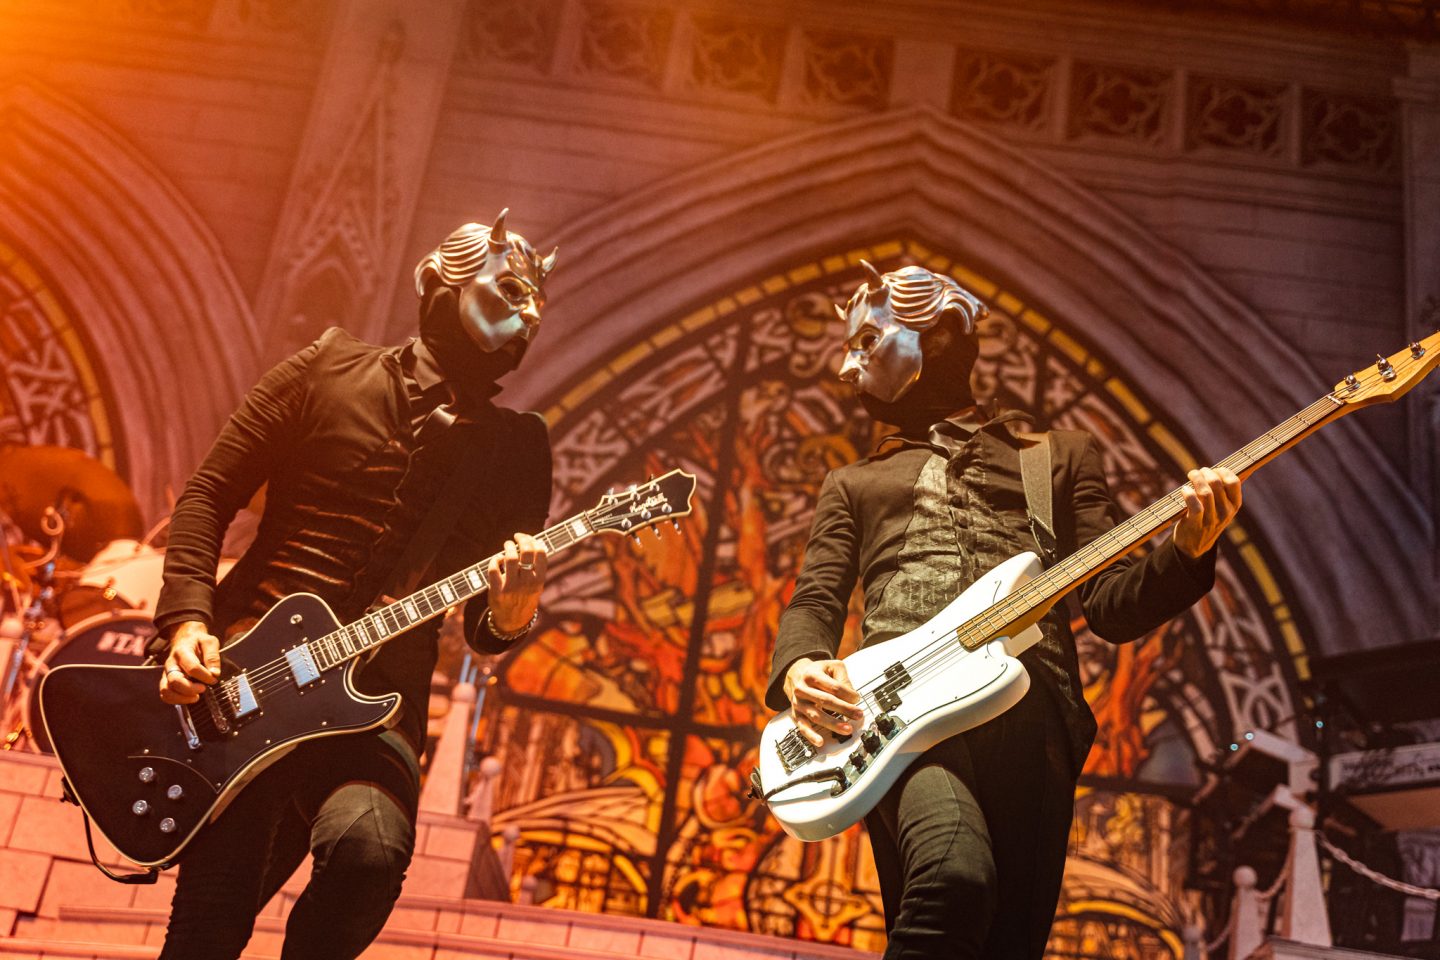 Ghost at Chicago Open Air 2019 by Thomas Bock Photography